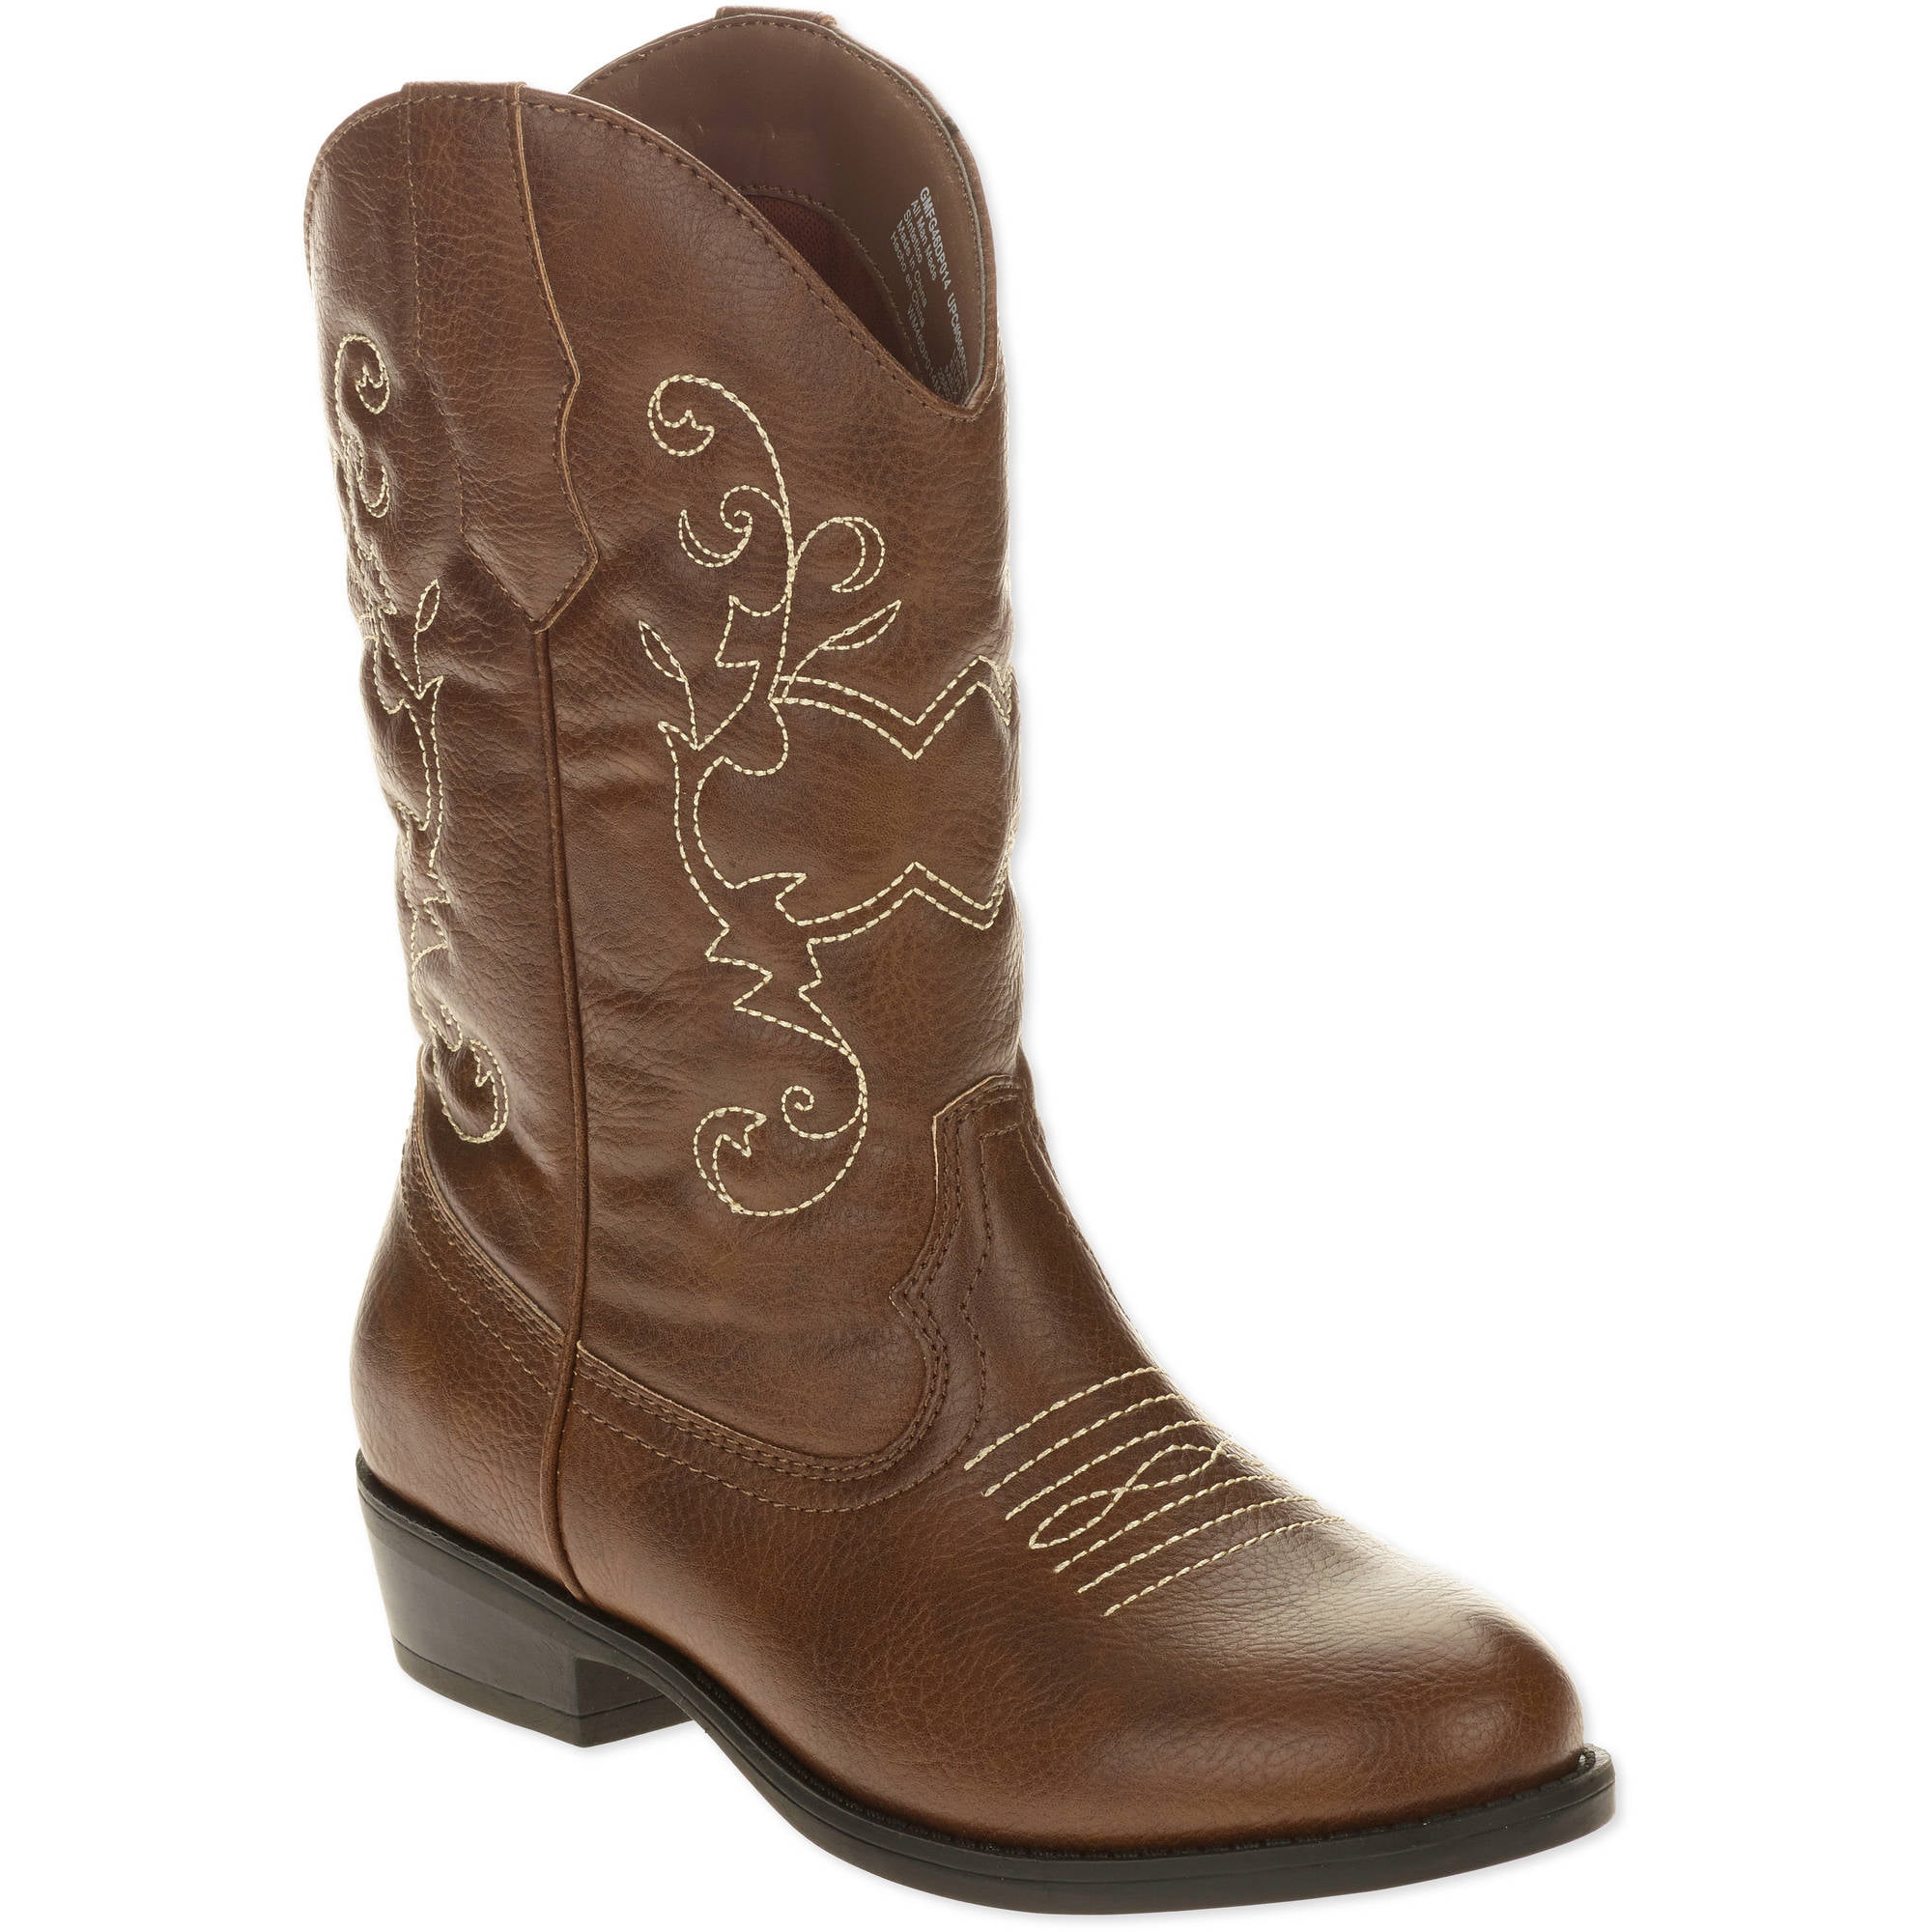 Beige and Brown Real Leather Cowboy Boot Stocking